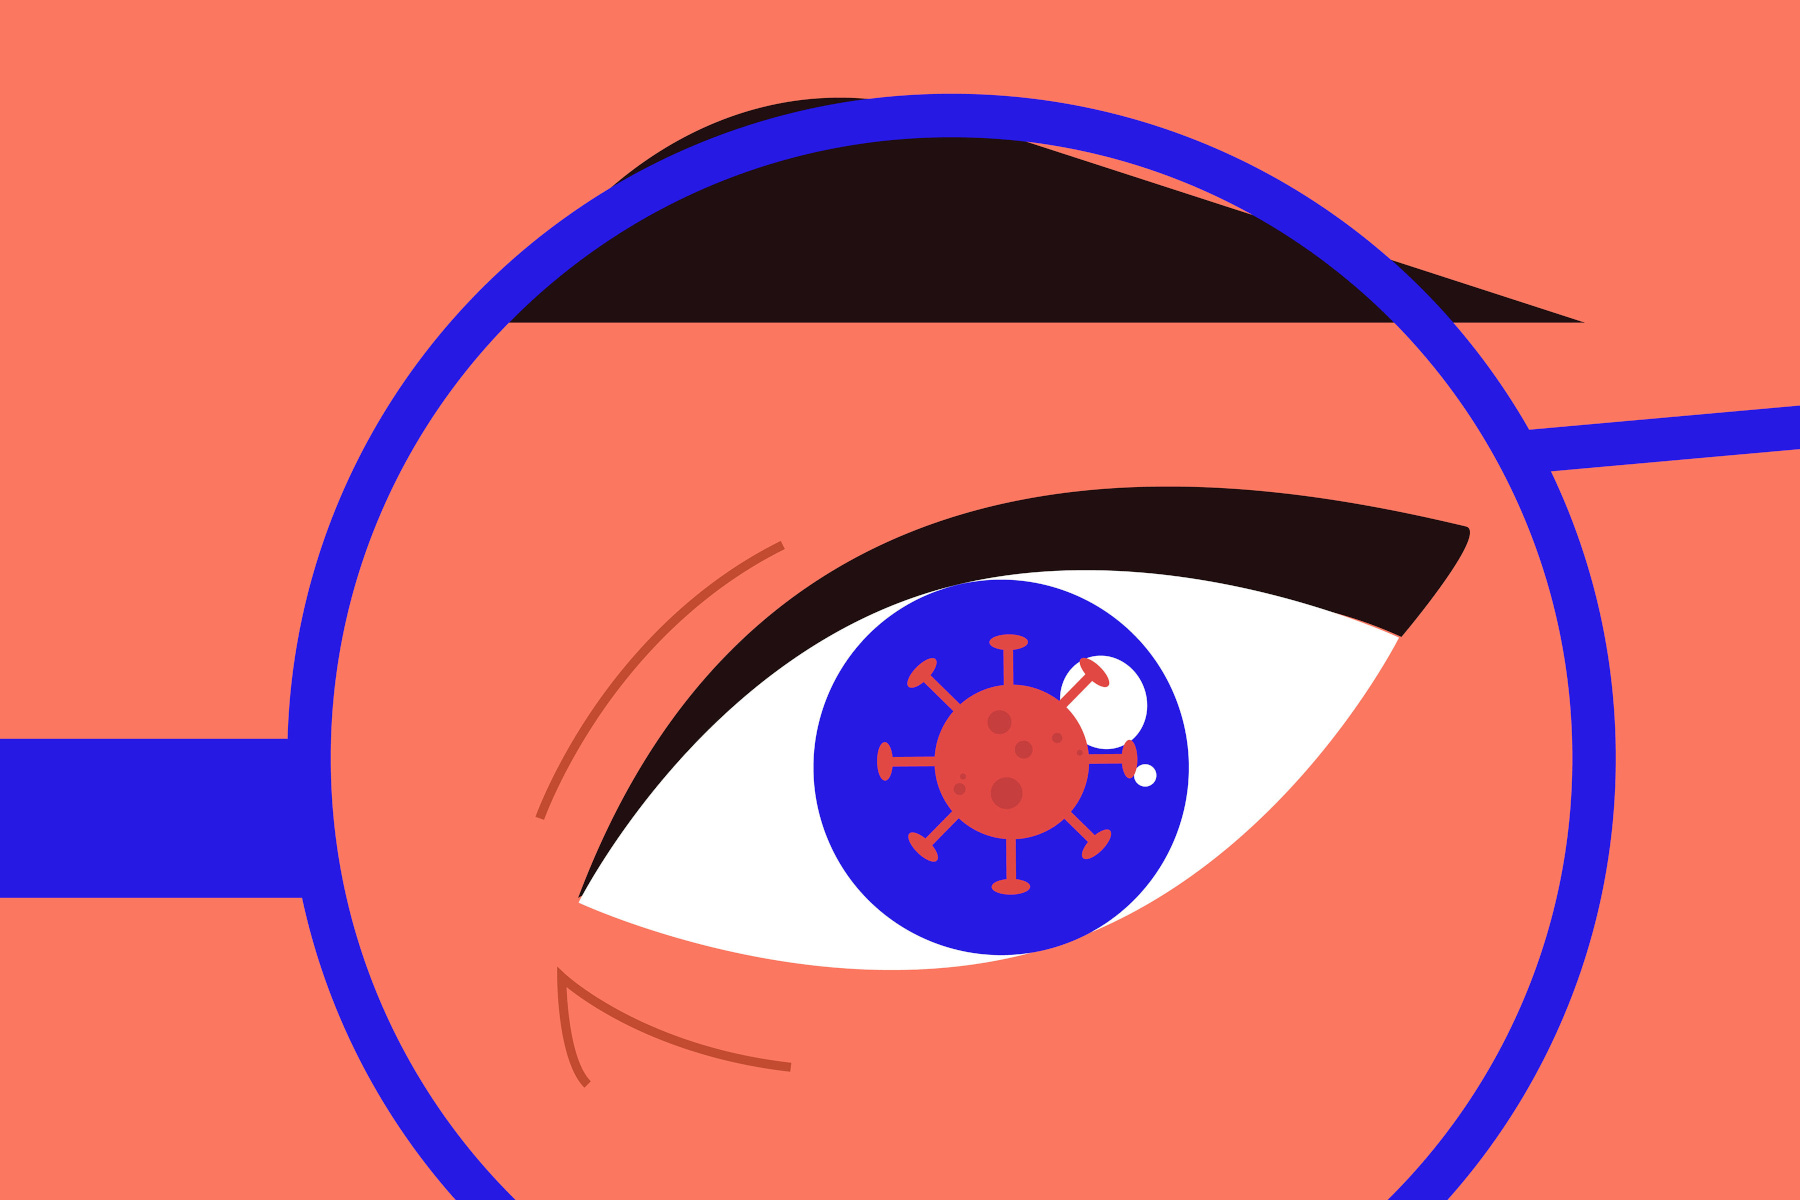 Illustration of an eye with a SARS-CoV-2 virus particle; with blue, black and coral pink colours. Illustration by Monika Jurczyk / Adobe.